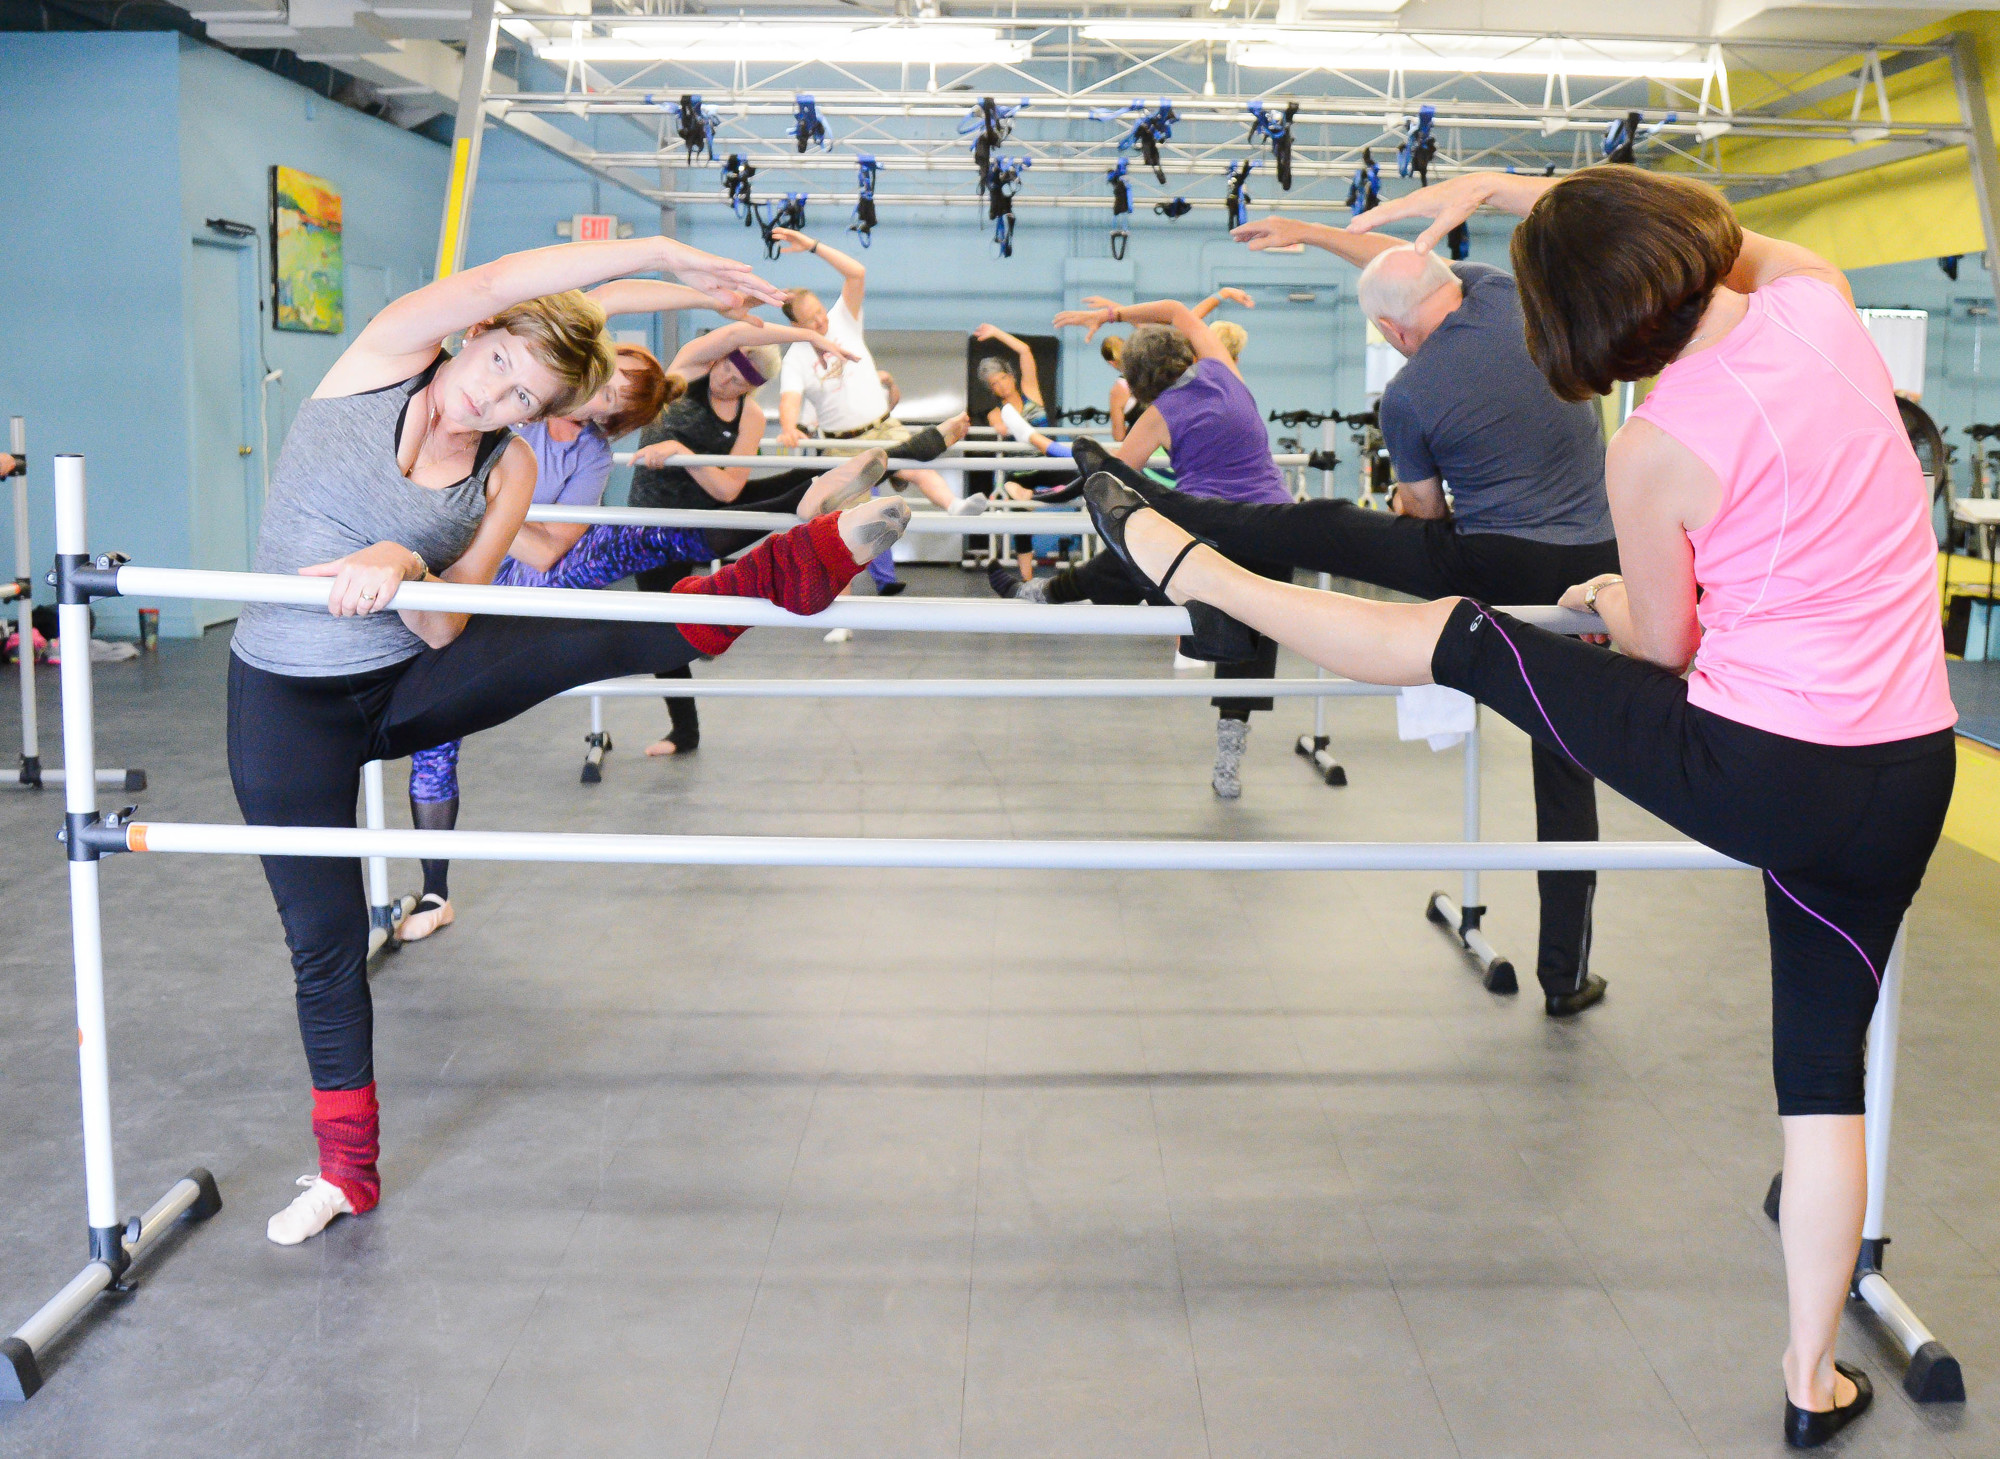 Angela Camit, 59, (left) and Ursula Pfeil, 74, (right) take part in the Pilates barre class. Photo by Paige Wilson